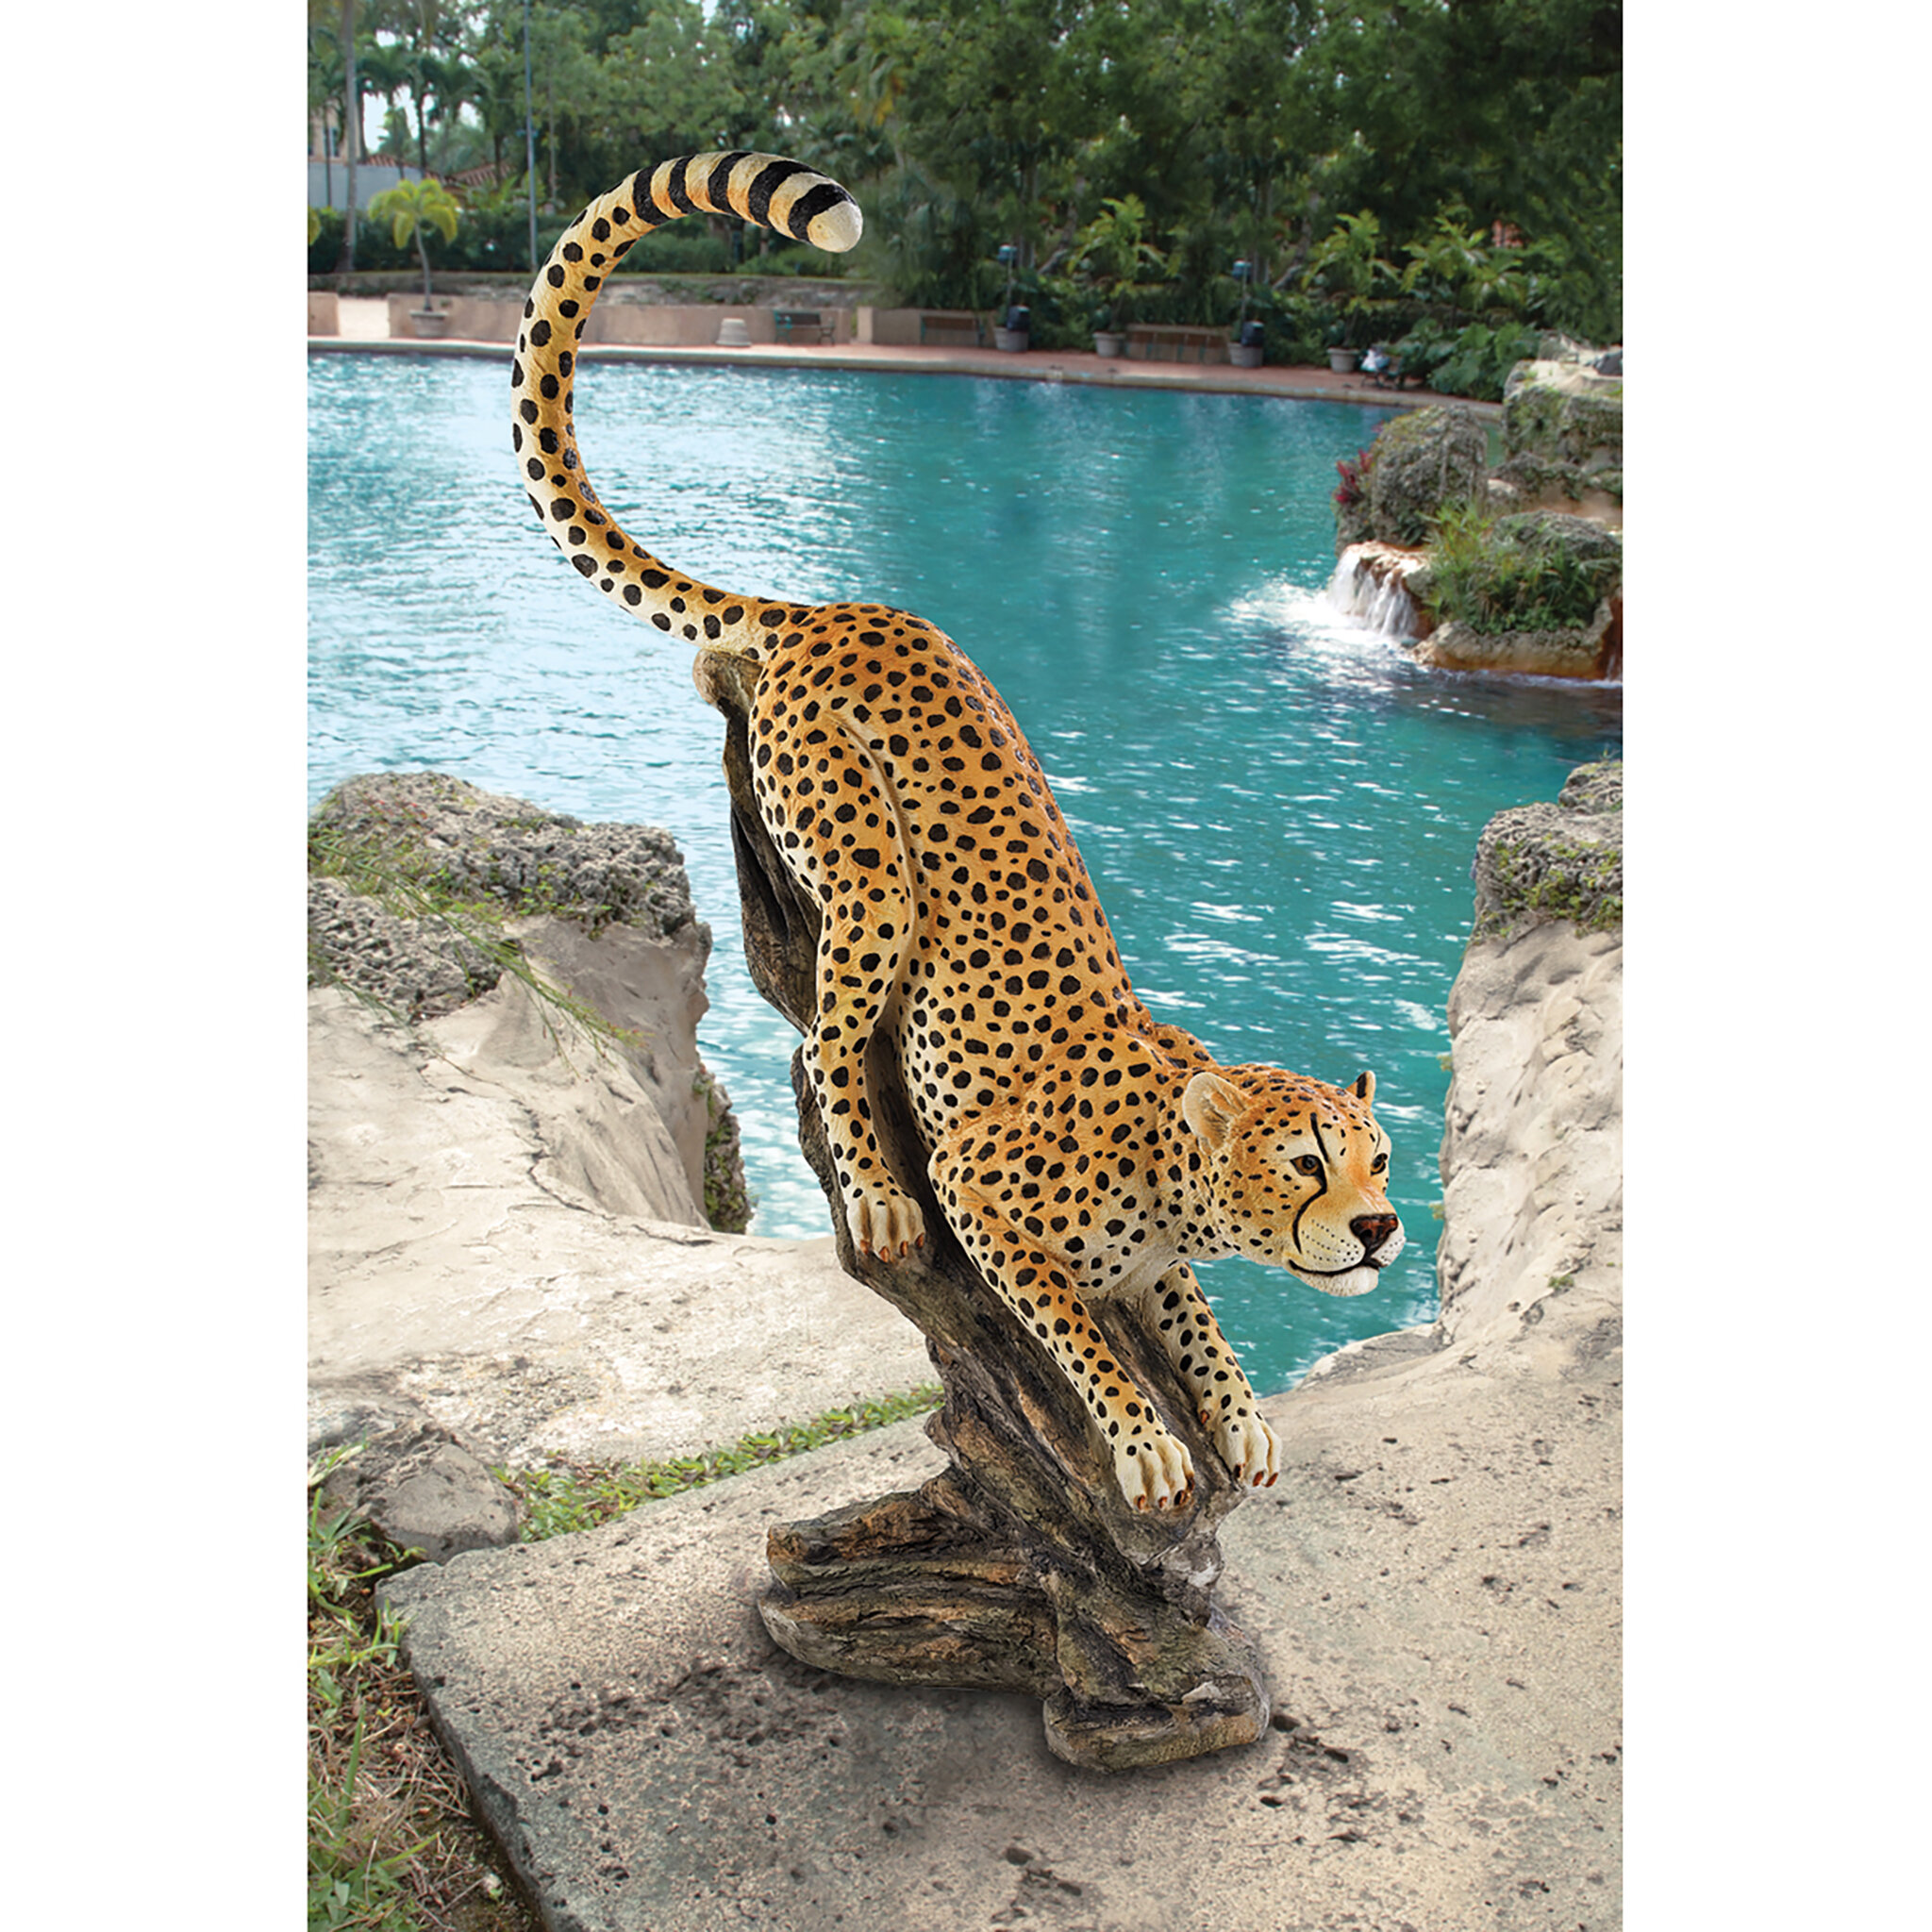 Sold at Auction: Ceramic Hand Painted Lifesize Cheetah Figurine